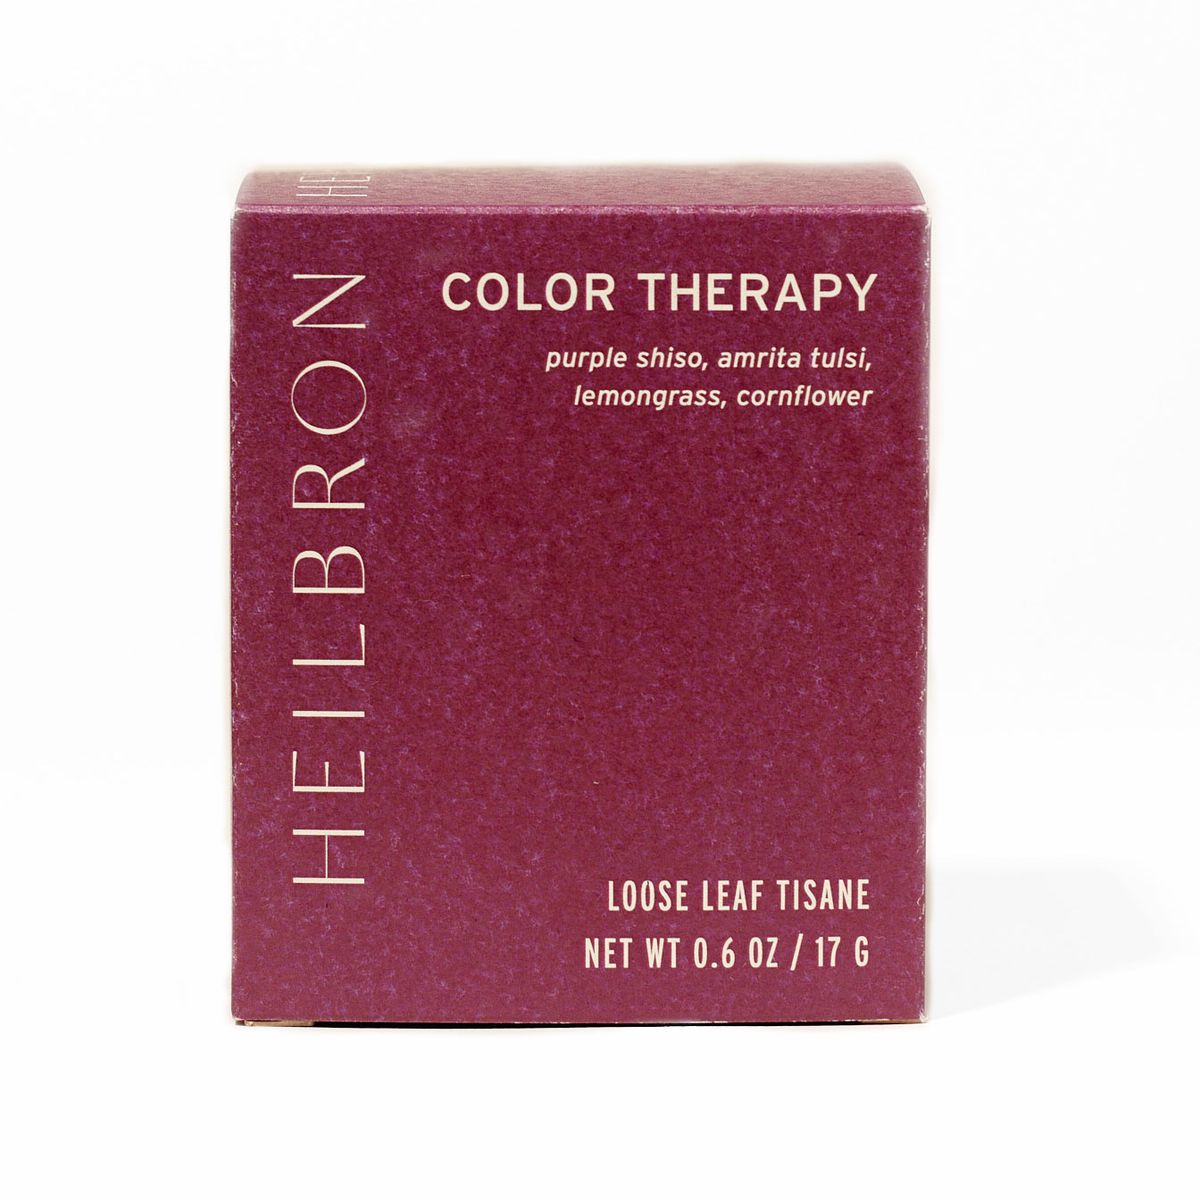 A red-purple box that reads 'Color Therapy' with loose leaf tea inside.